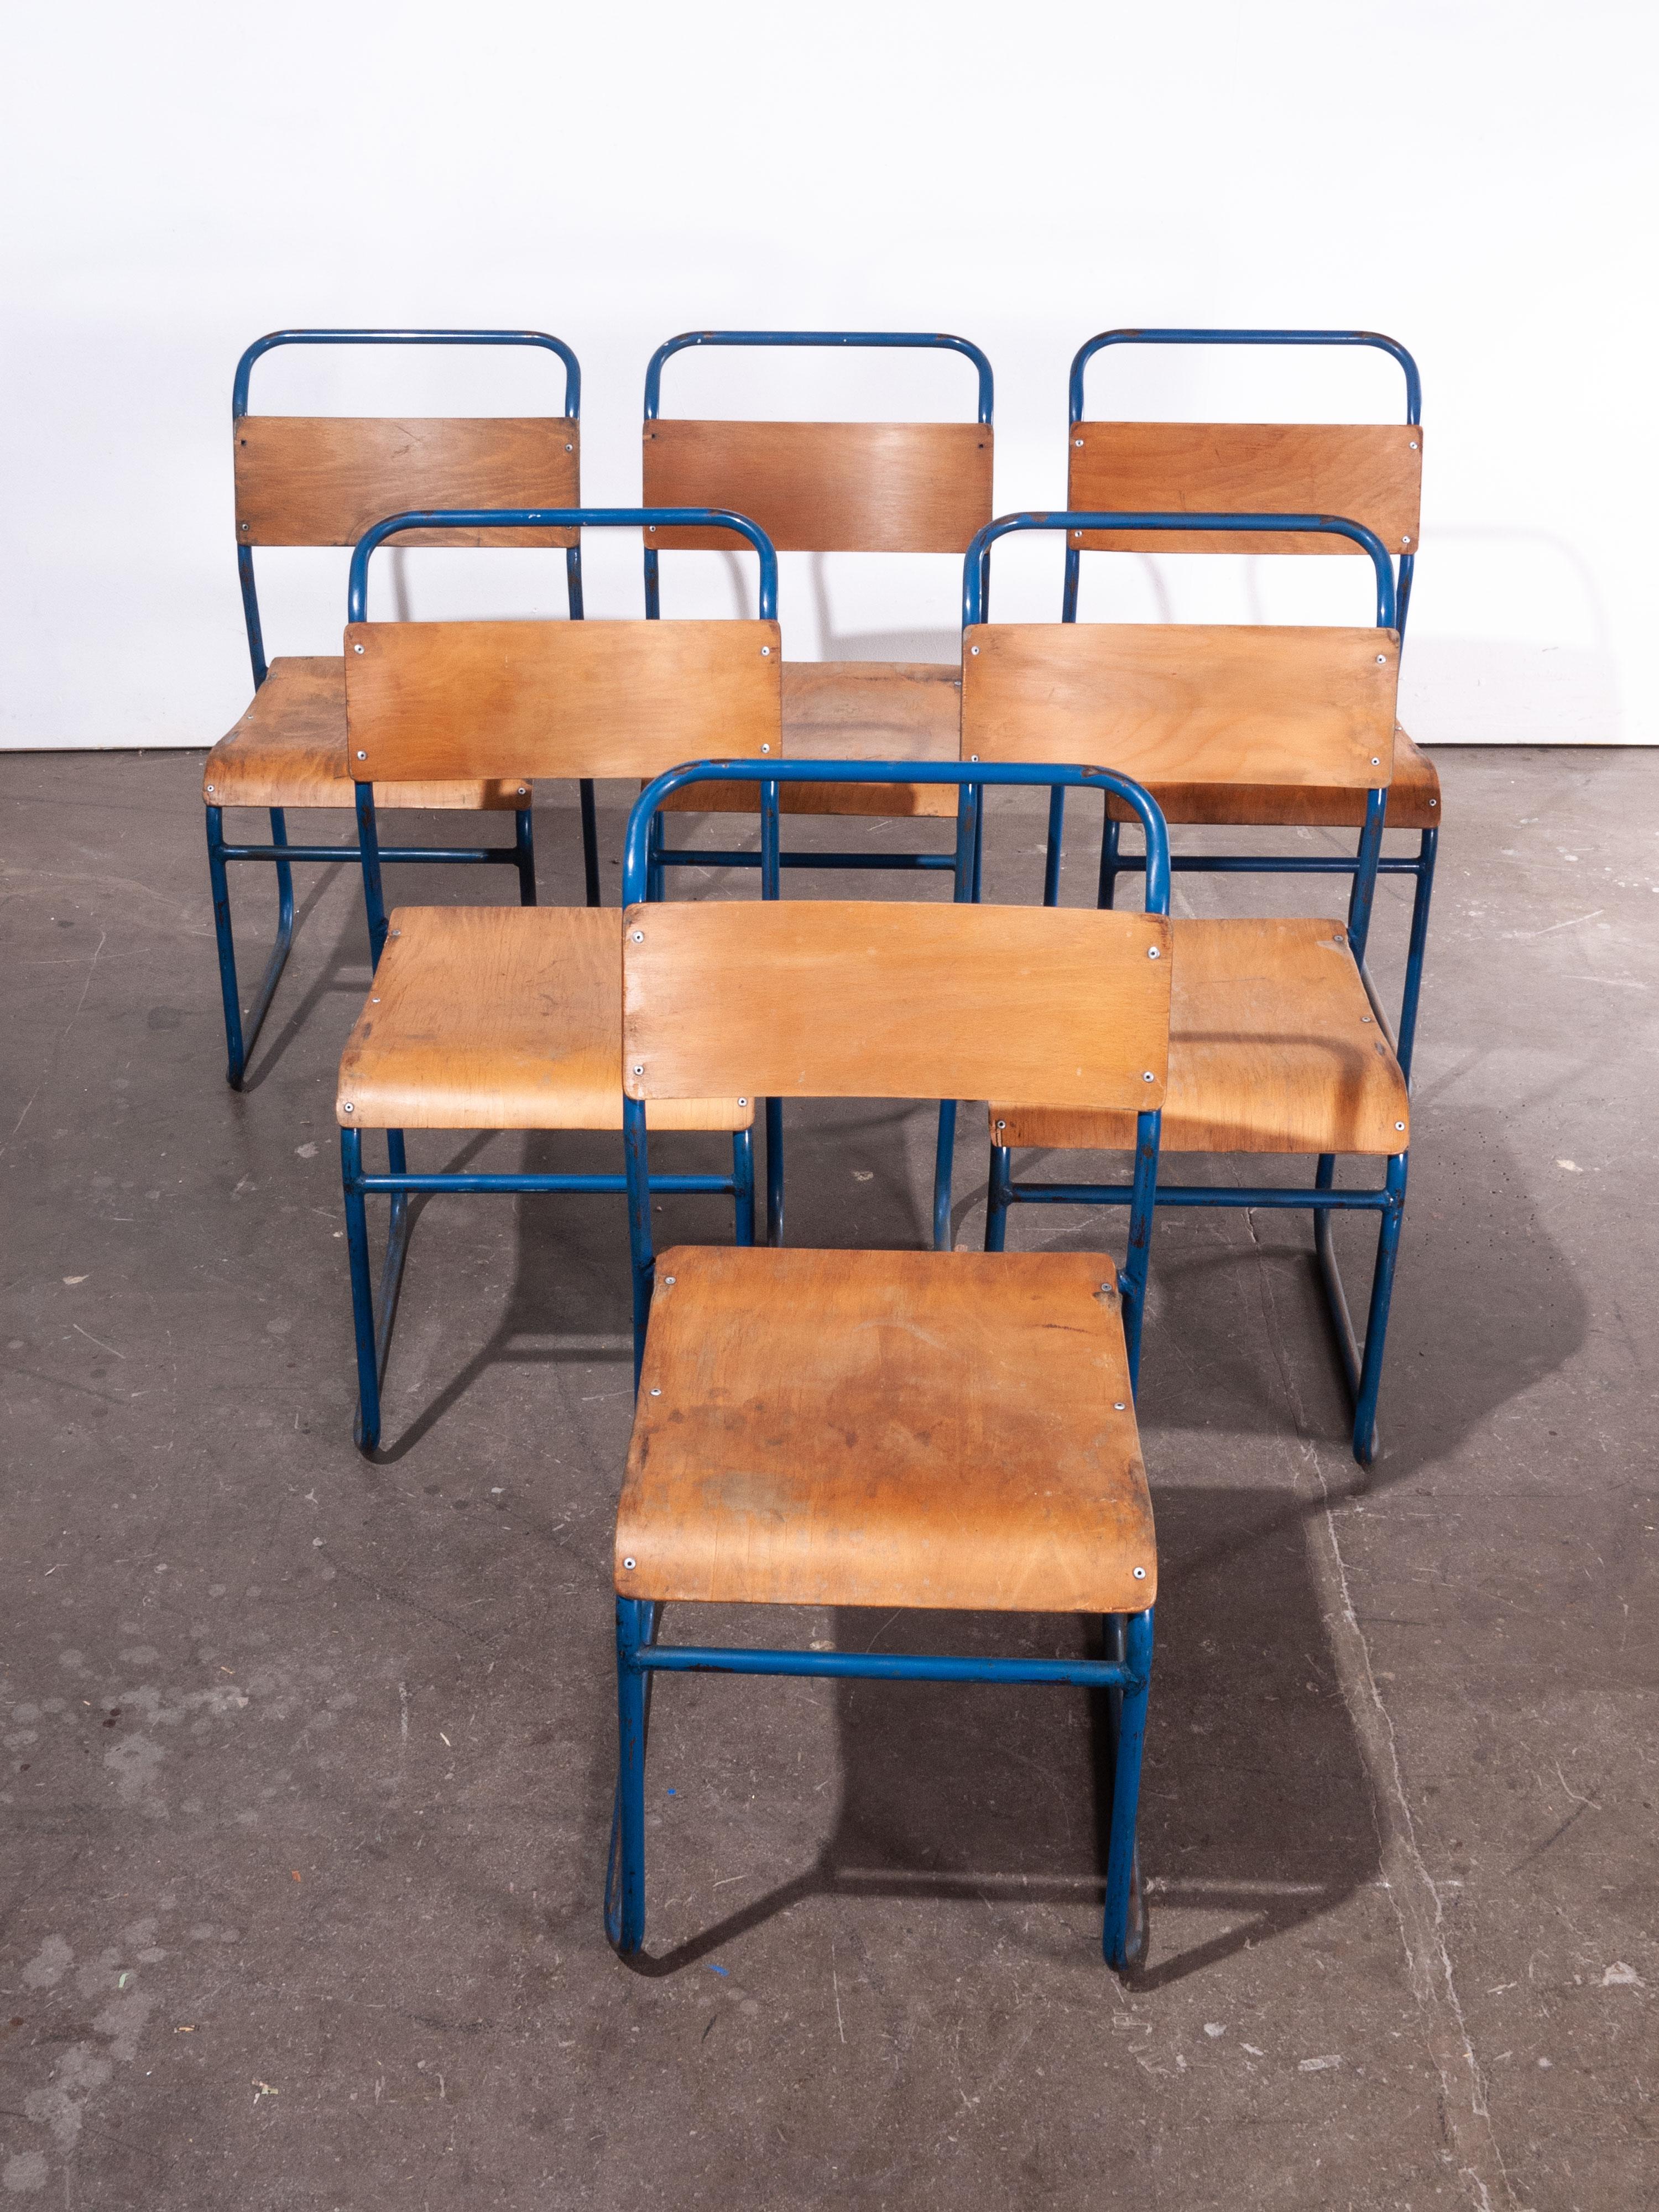 1950s Remploy tubular metal stacking dining chairs – set of six. Remploy was established in 1944 by the Disabled Persons (Employment) Act, the aim of which was to provide employment for people injured during the war and coal miners with health